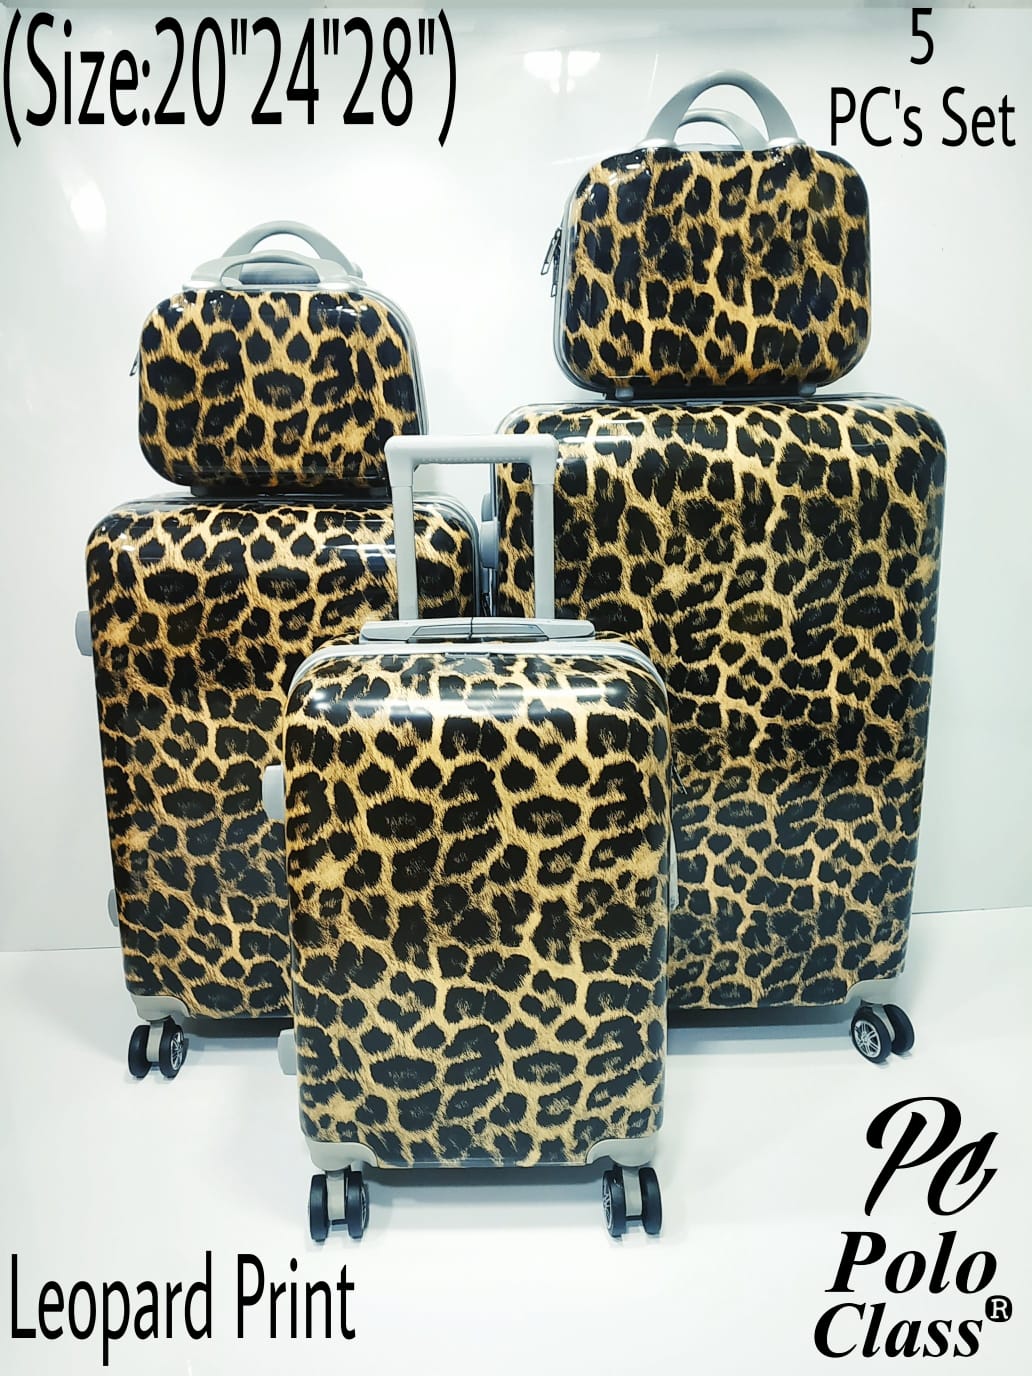 Trolley bag set - Travel store Types Of Bags Trolly bags Ghoramara Polo club